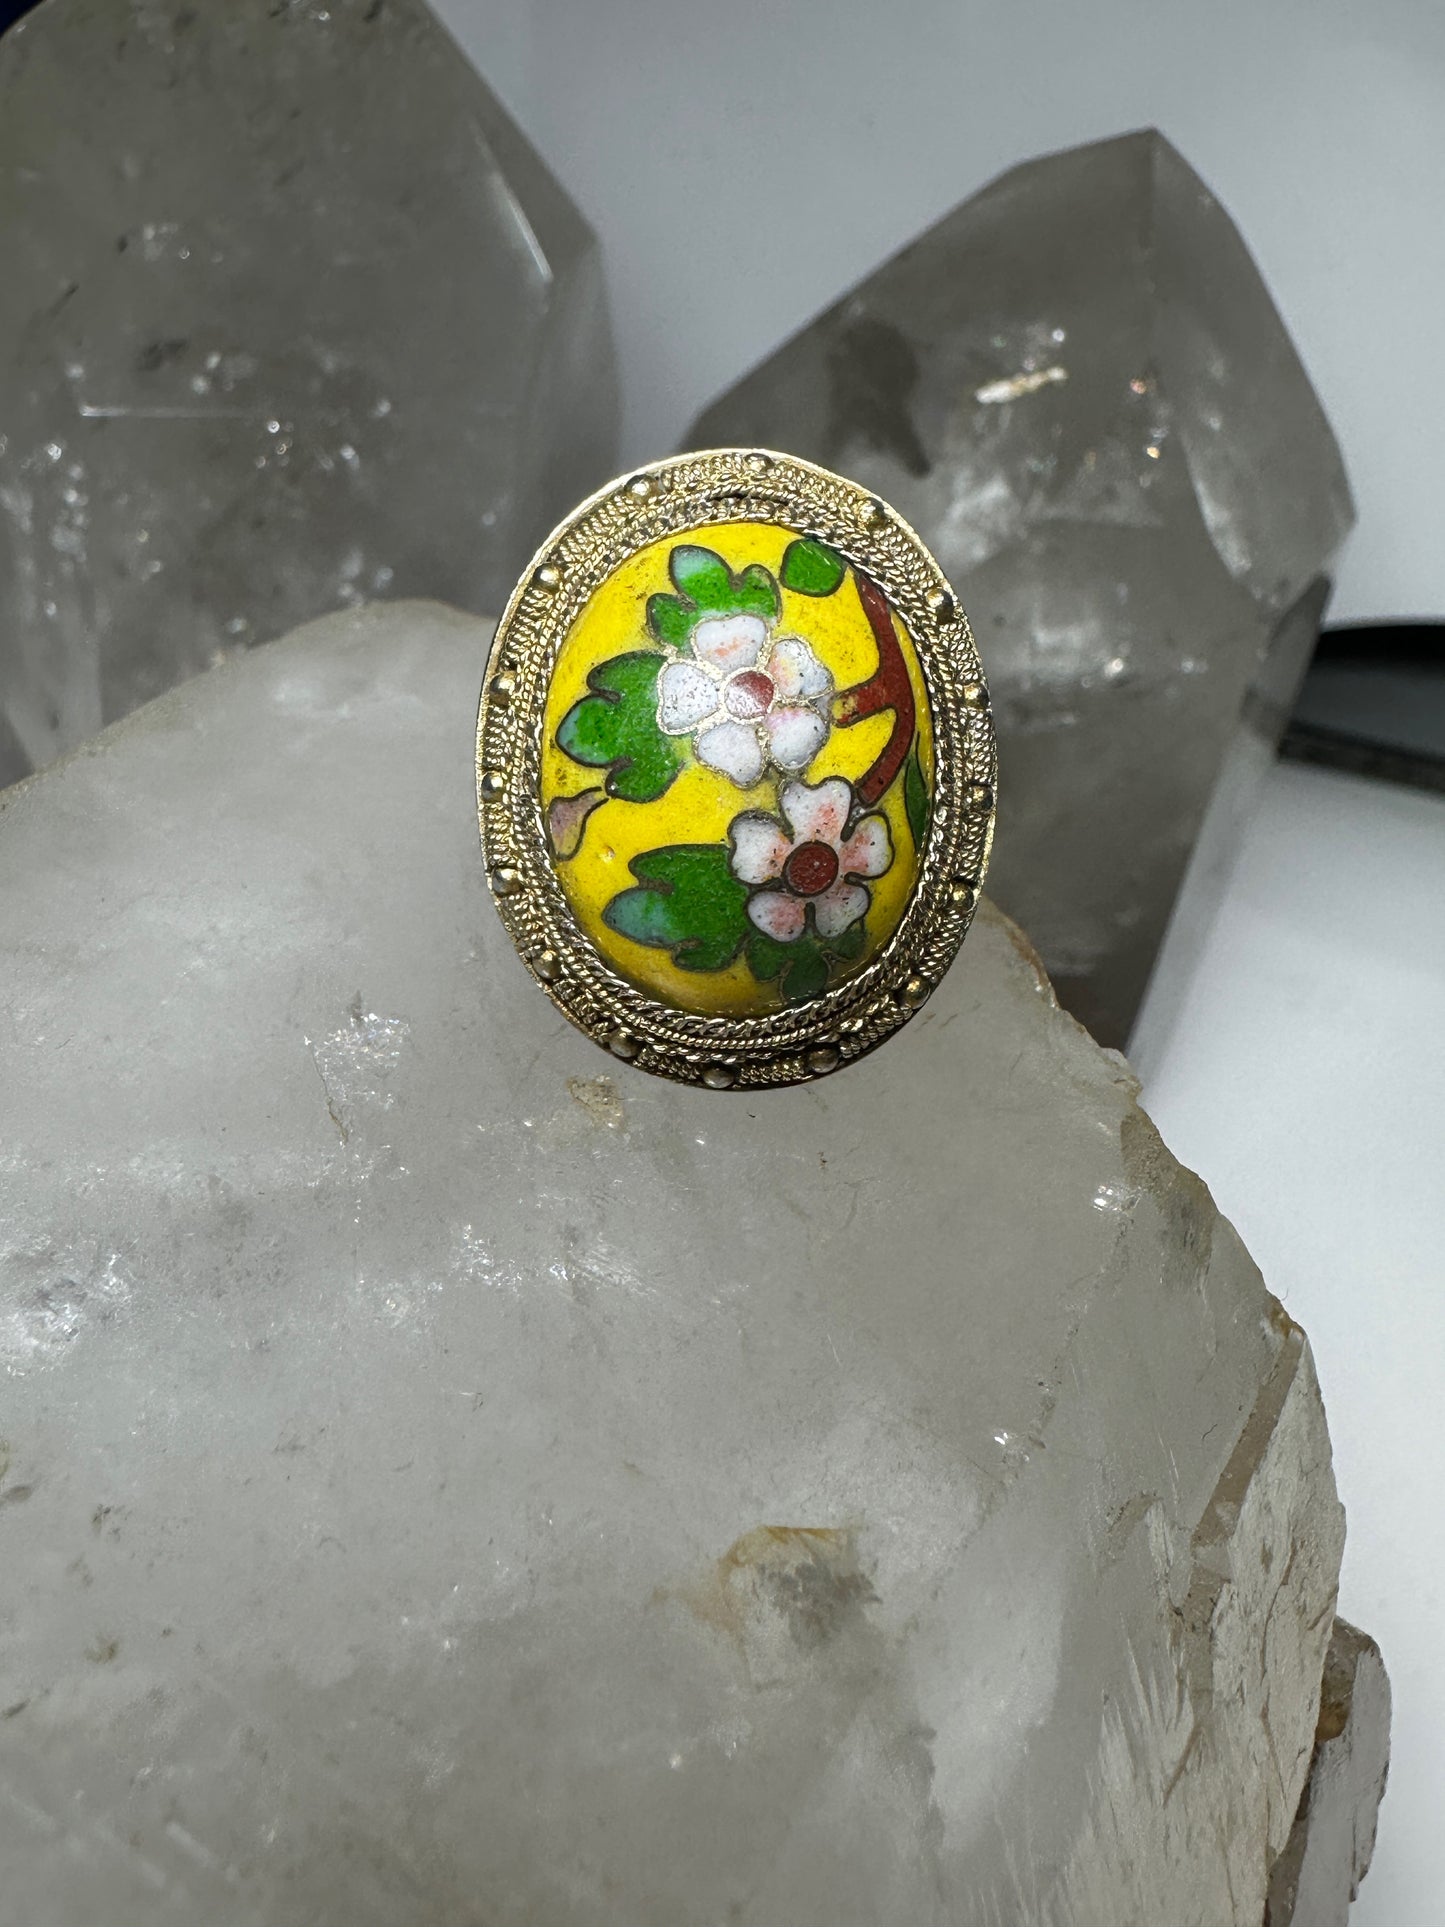 Floral ring size 8 enamel cloisonne Chinese export sterling silver  women girls